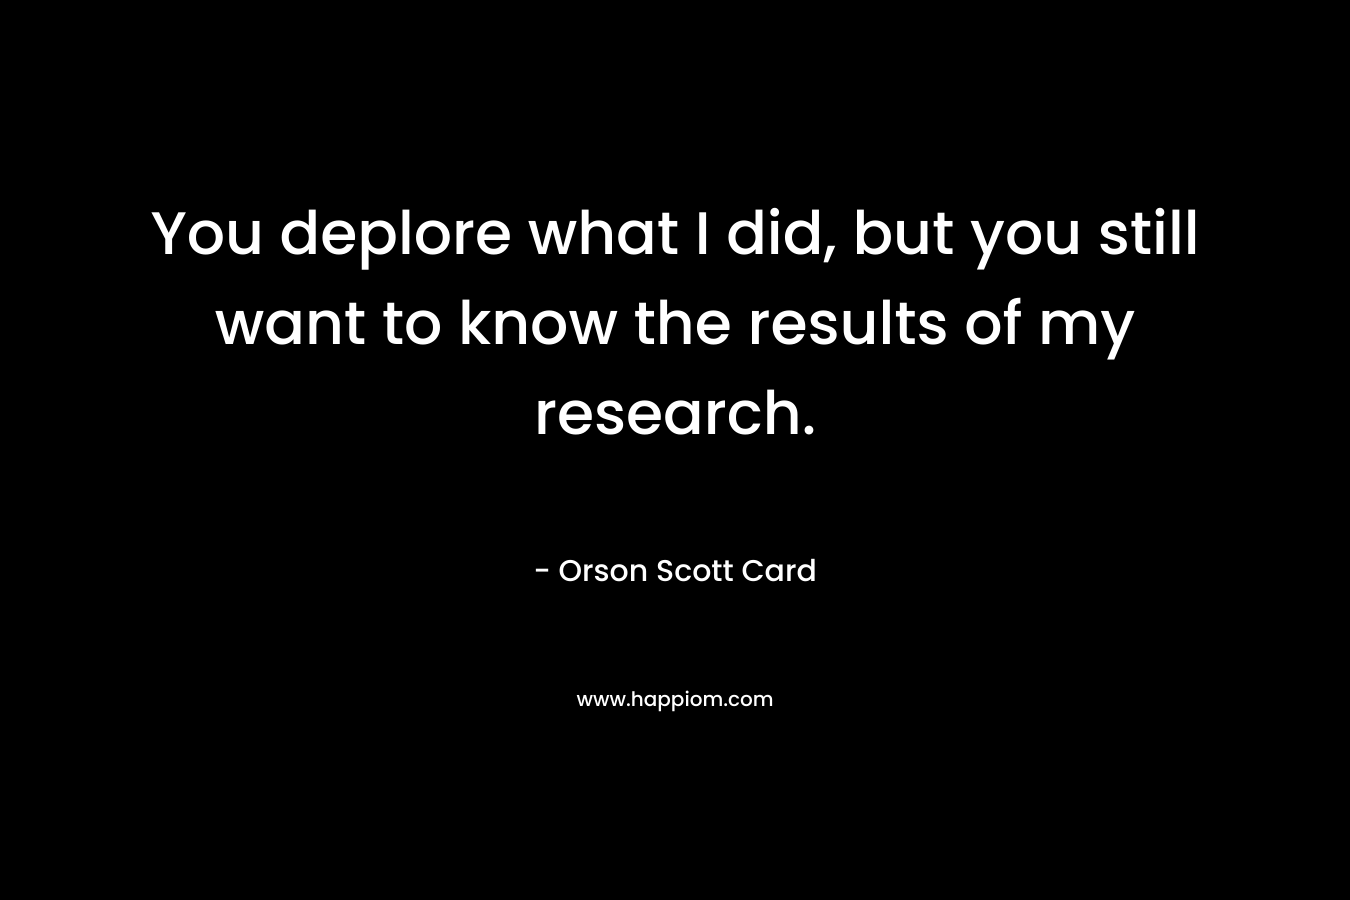 You deplore what I did, but you still want to know the results of my research. – Orson Scott Card